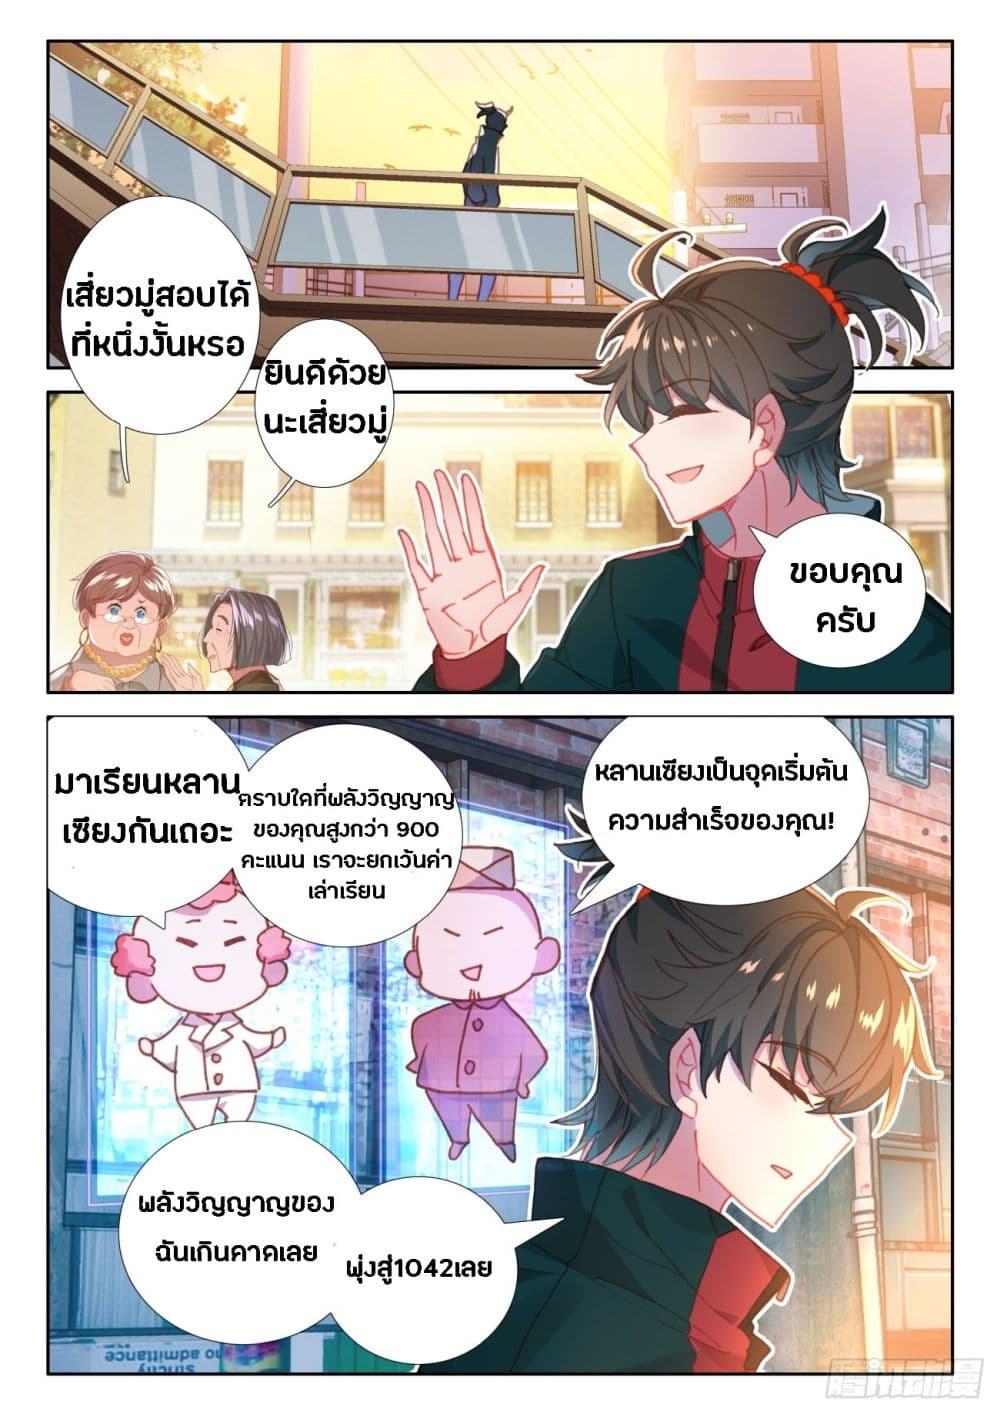 Becoming Immortal by Paying Cash ตอนที่ 10 (12)